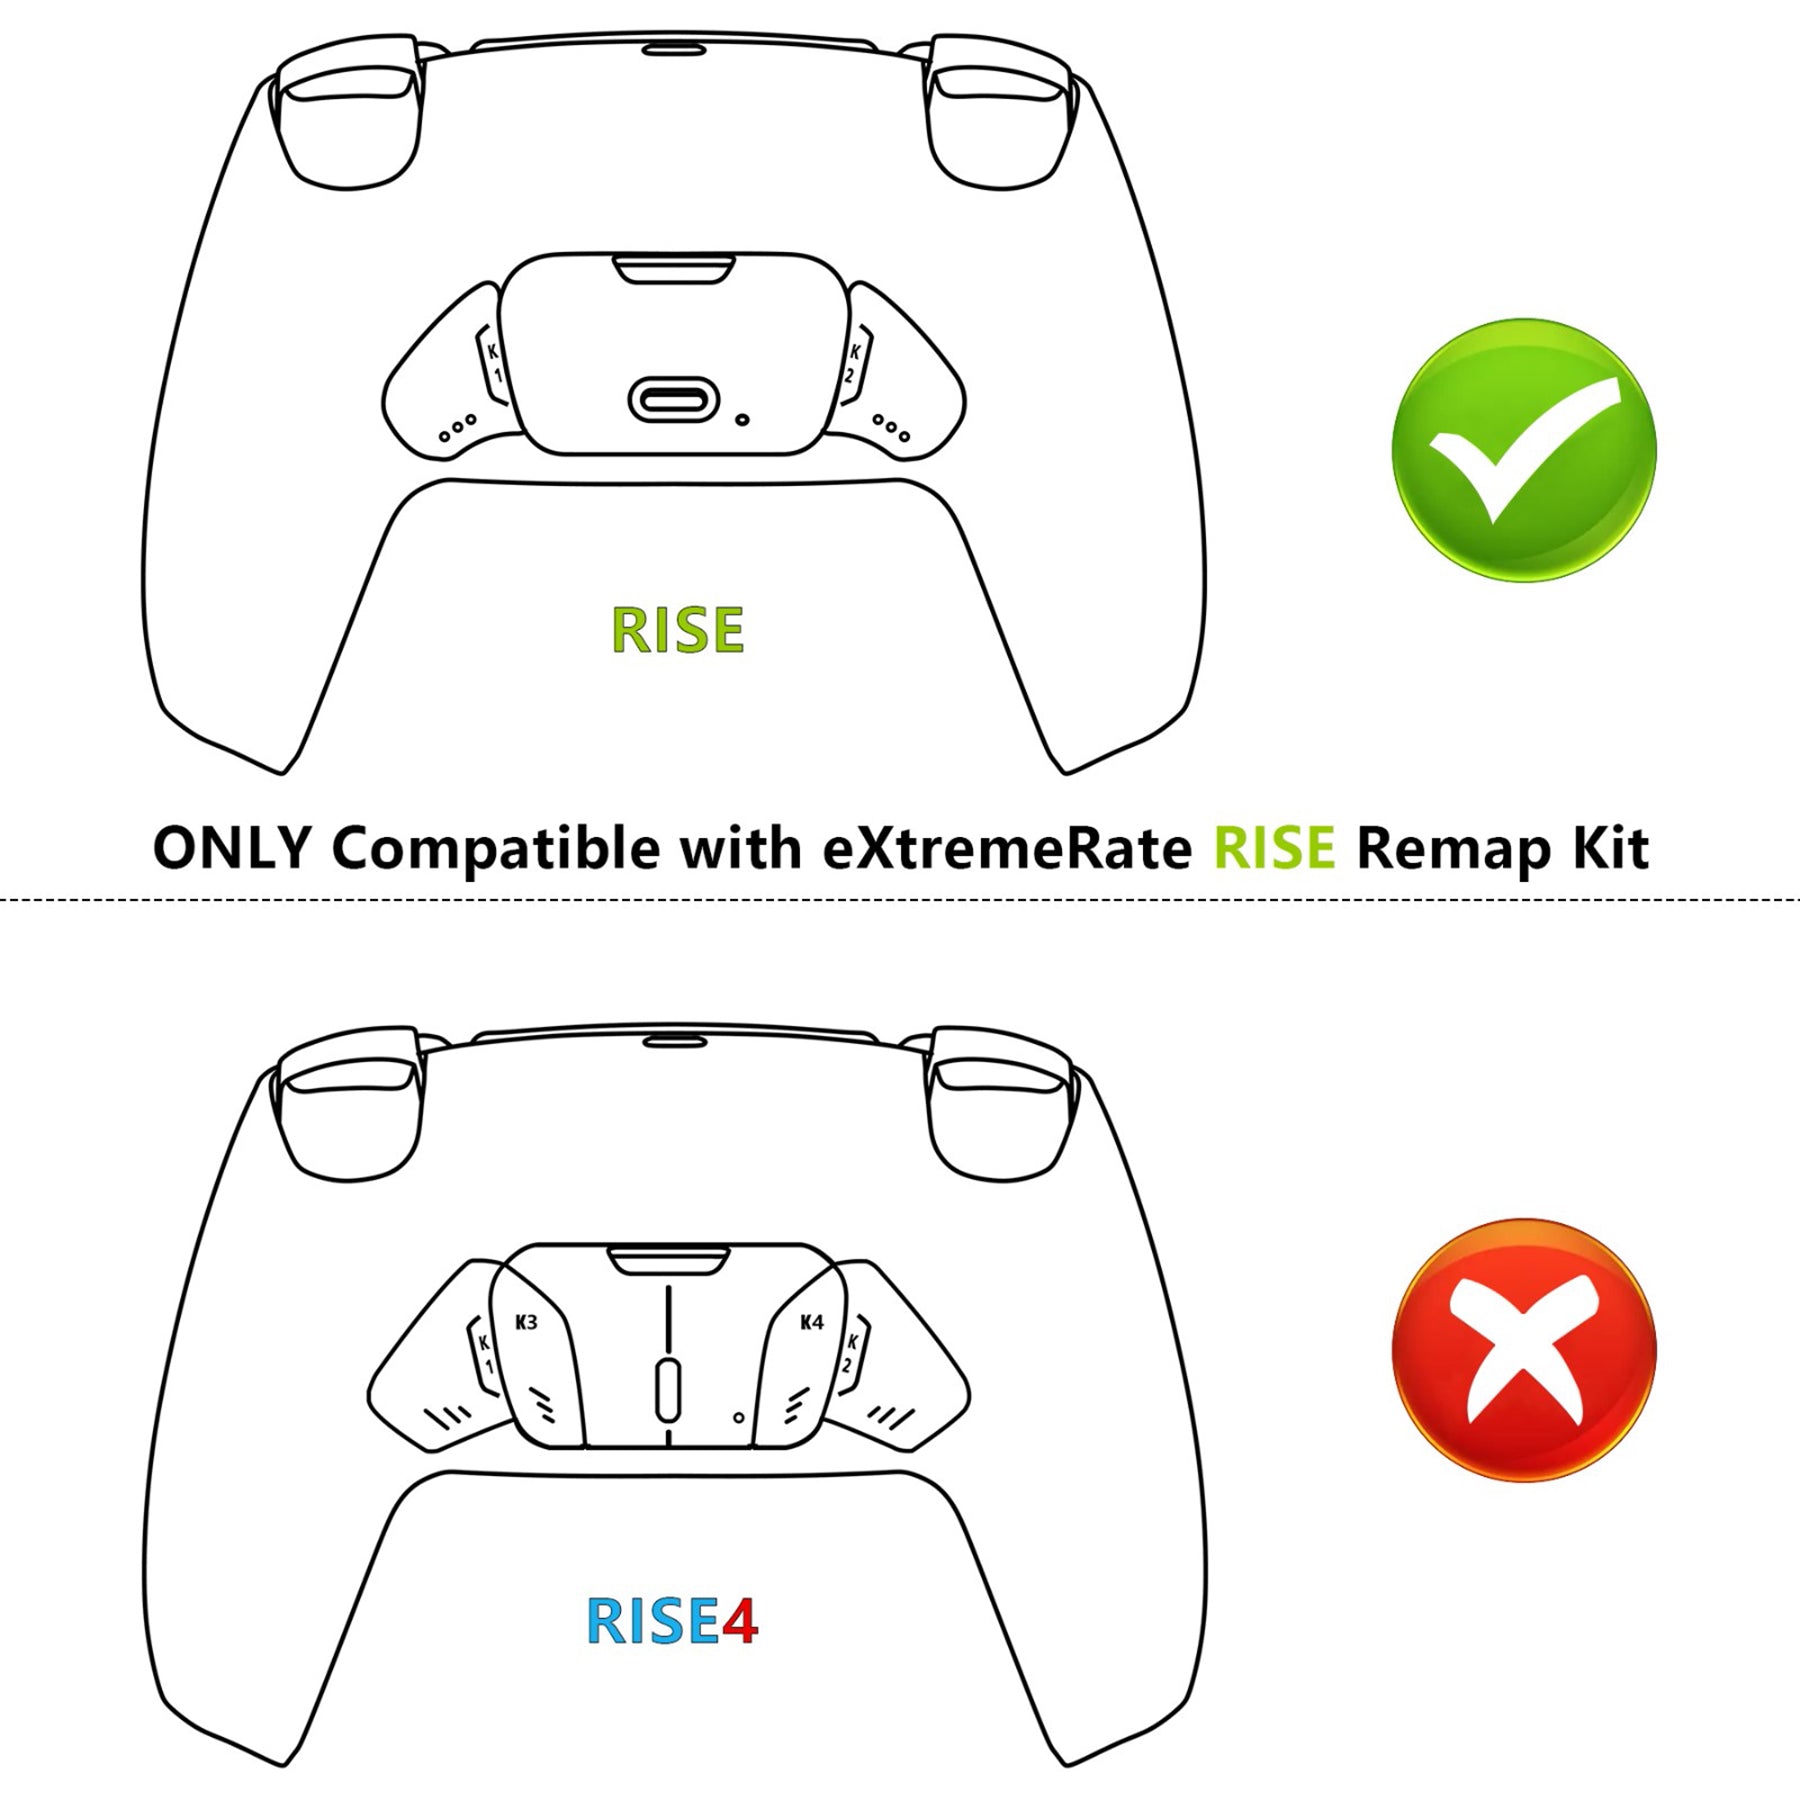 eXtremeRate Replacement Redesigned K1 K2 Back Buttons for eXtremerate RISE Remap Kit, Compatible with PS5 Controller - Solid White eXtremeRate